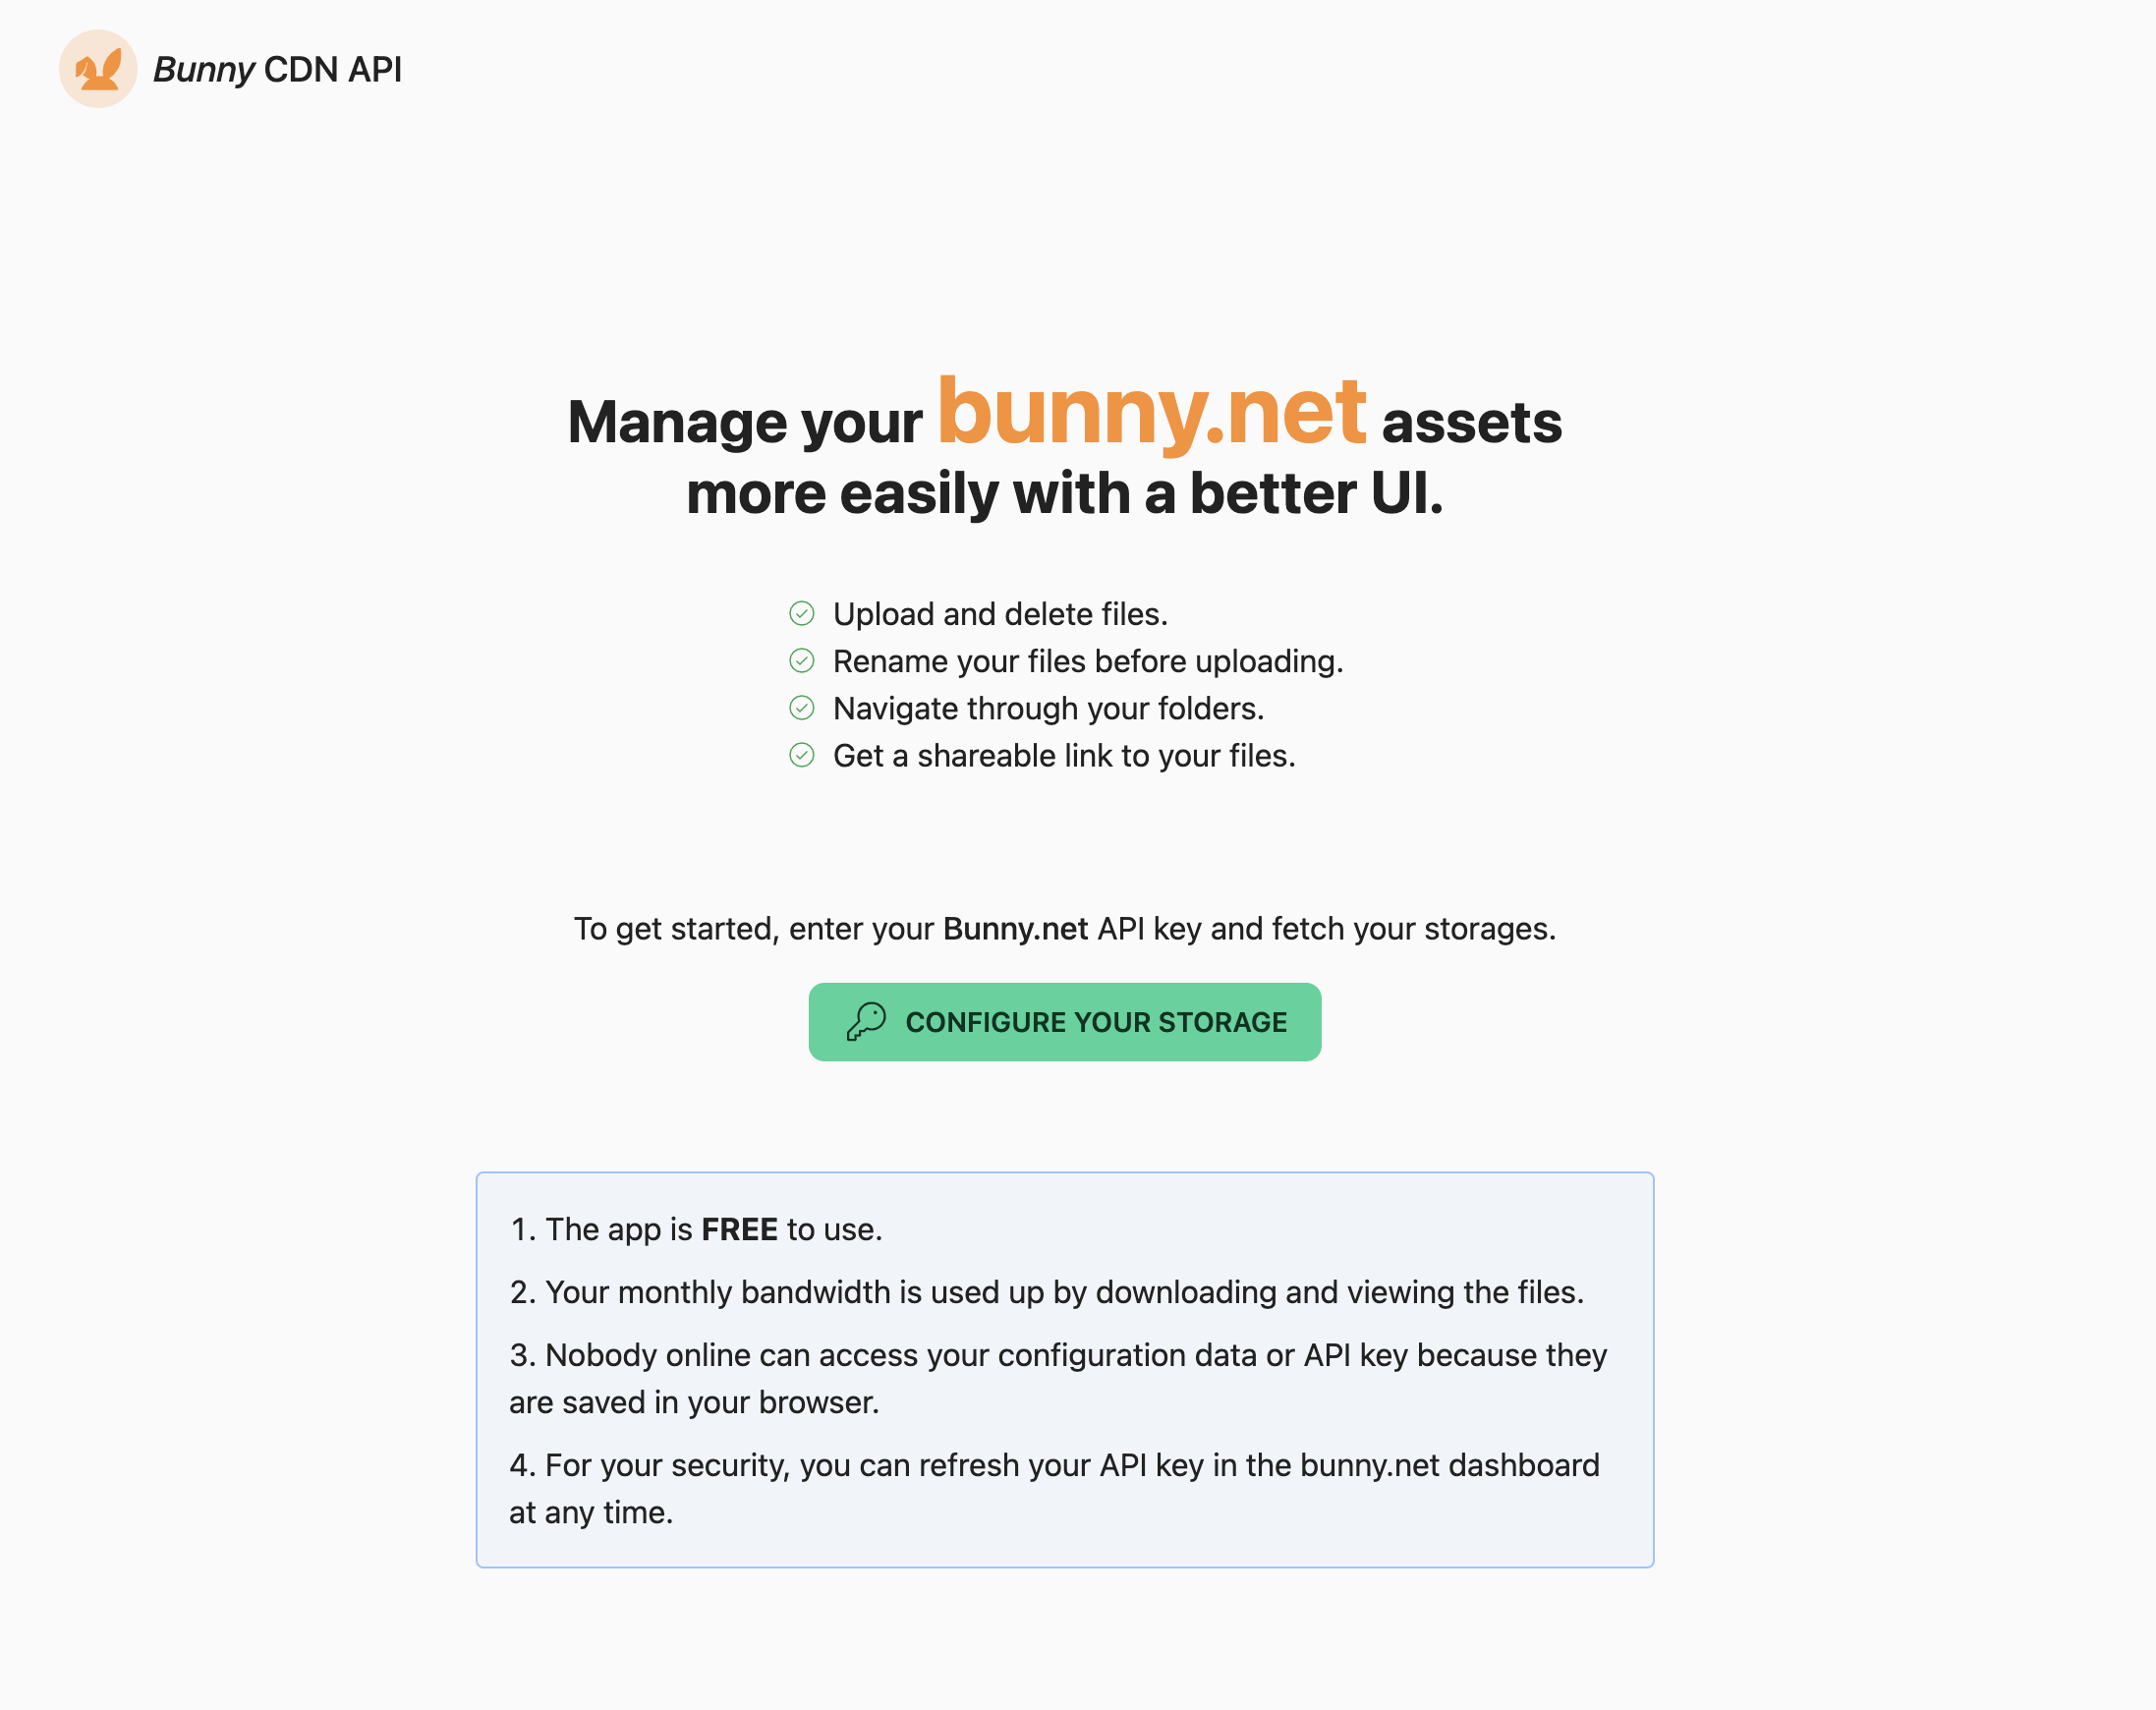 Image Manager for Bunny.net